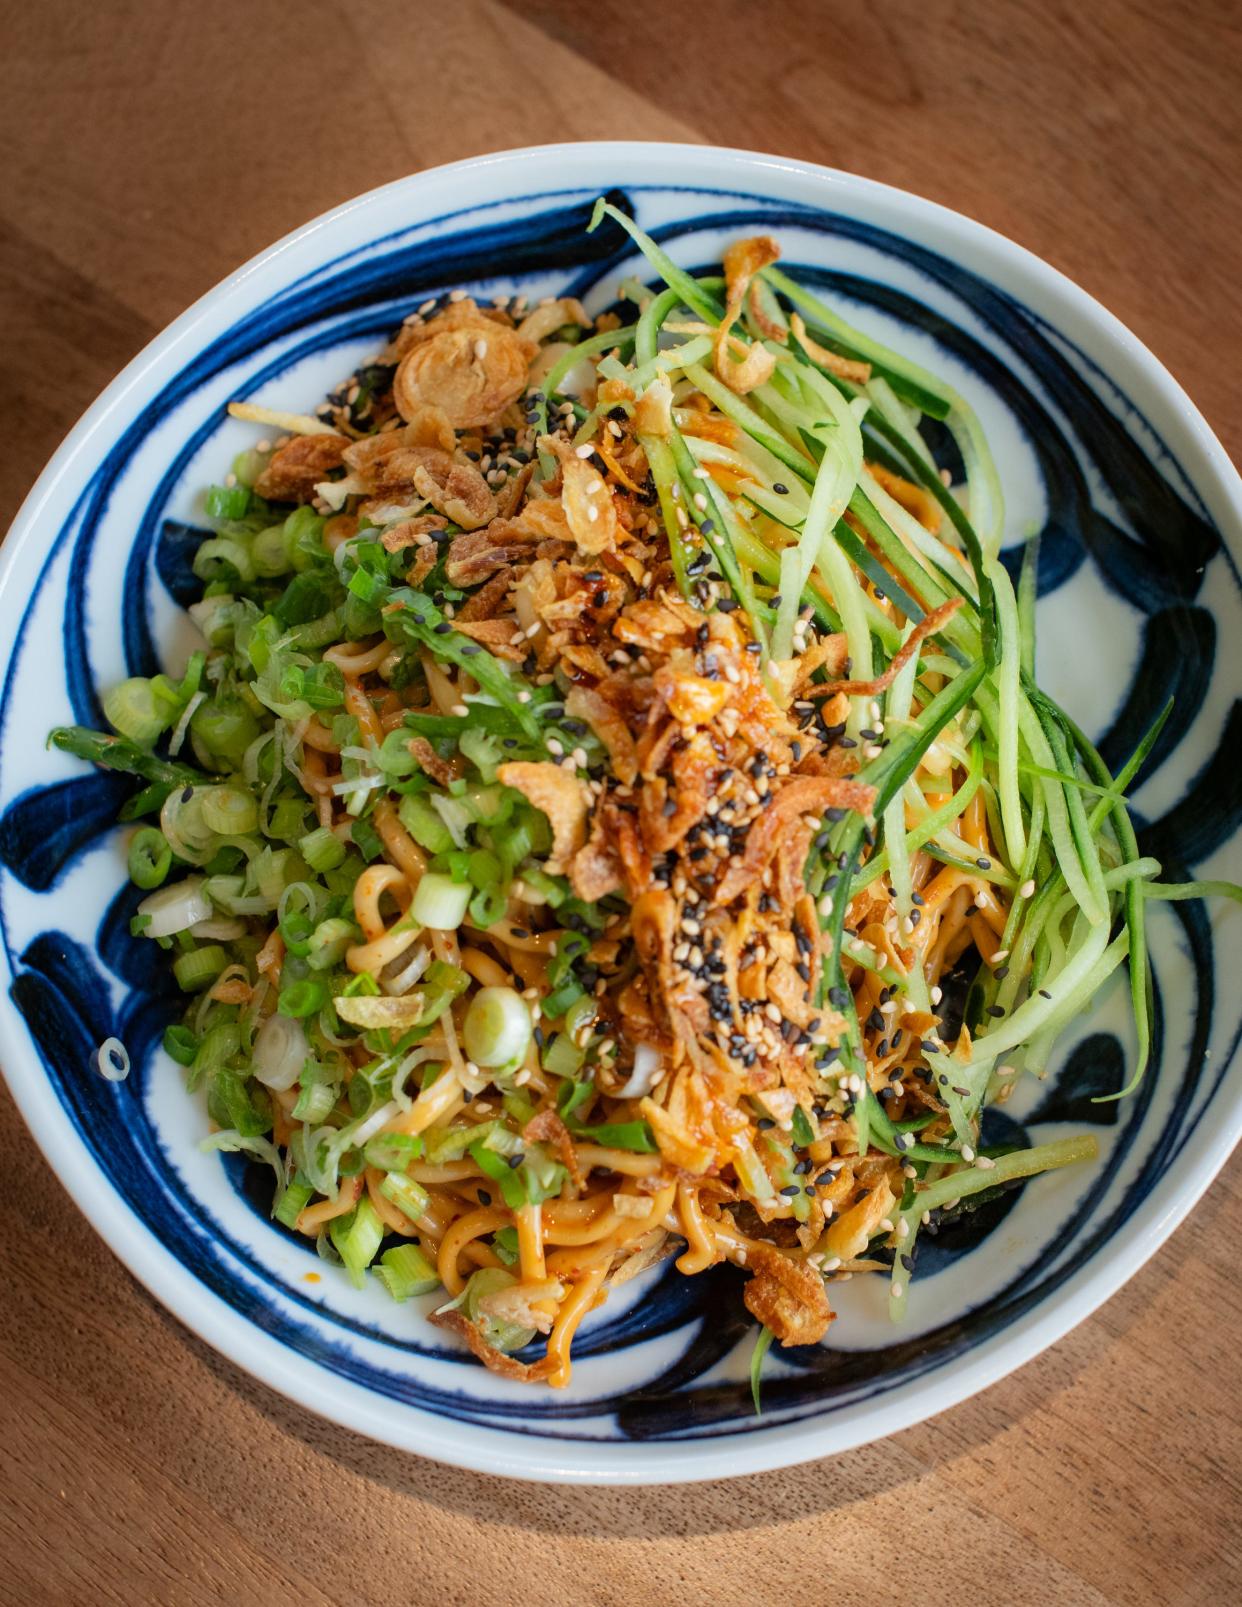 Cold sesame noodles is one of the best dishes at Zoé Tong on Barton Springs Road.